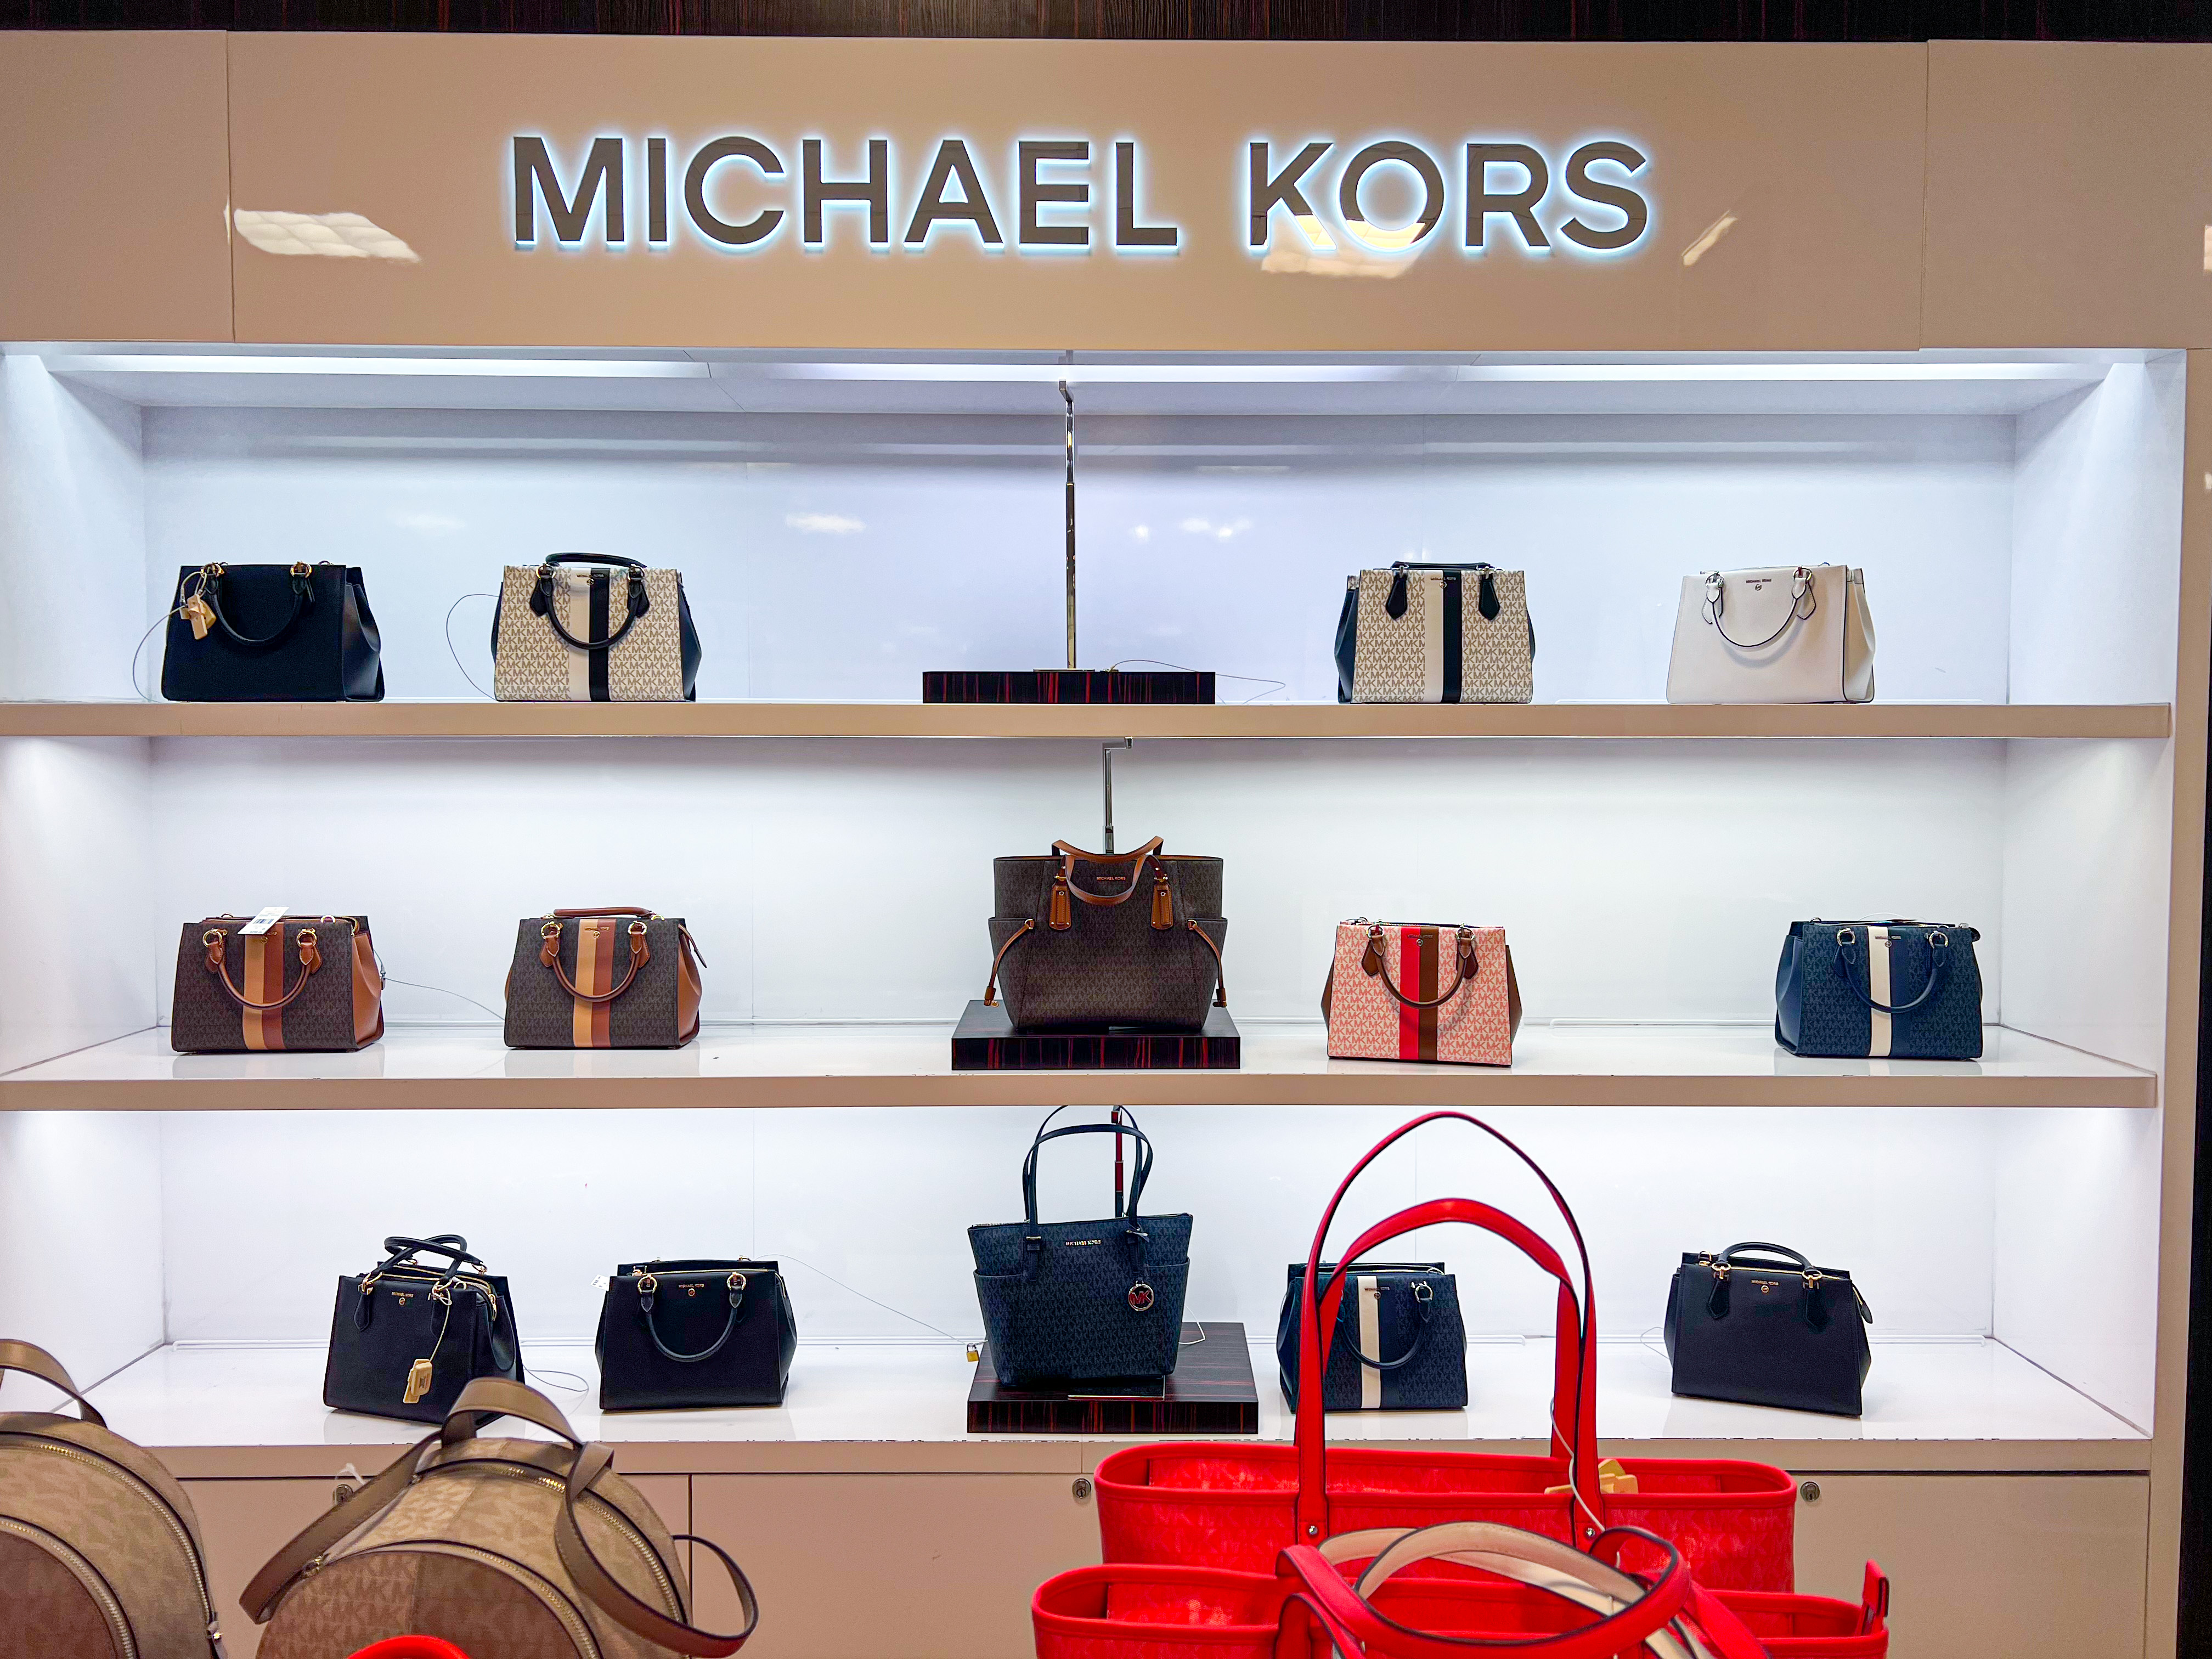 Michael Kors Cash Back Offers, Coupons & Black Friday Discounts